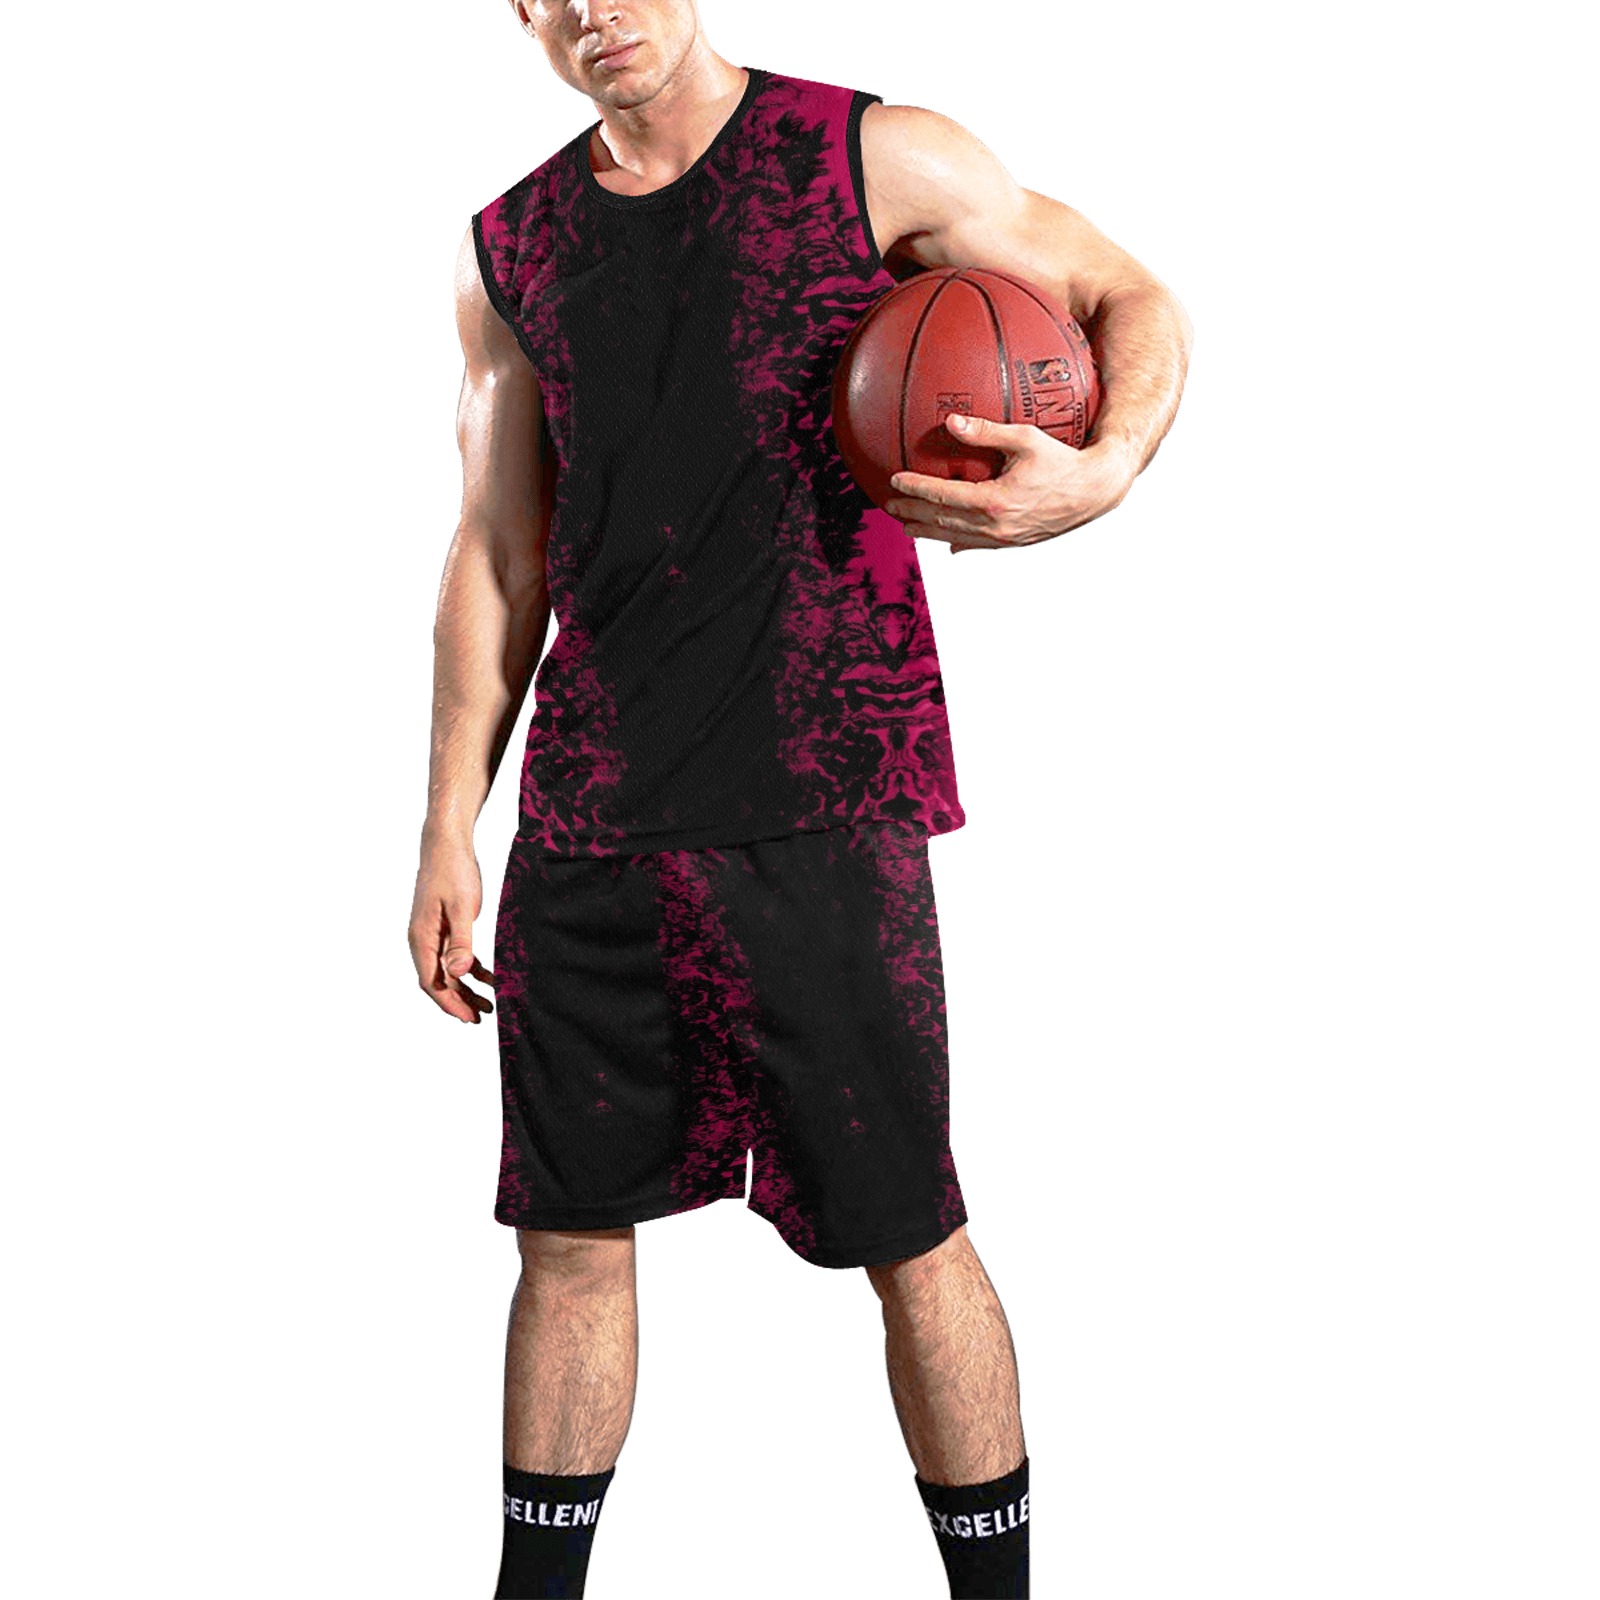 roots- 9 All Over Print Basketball Uniform